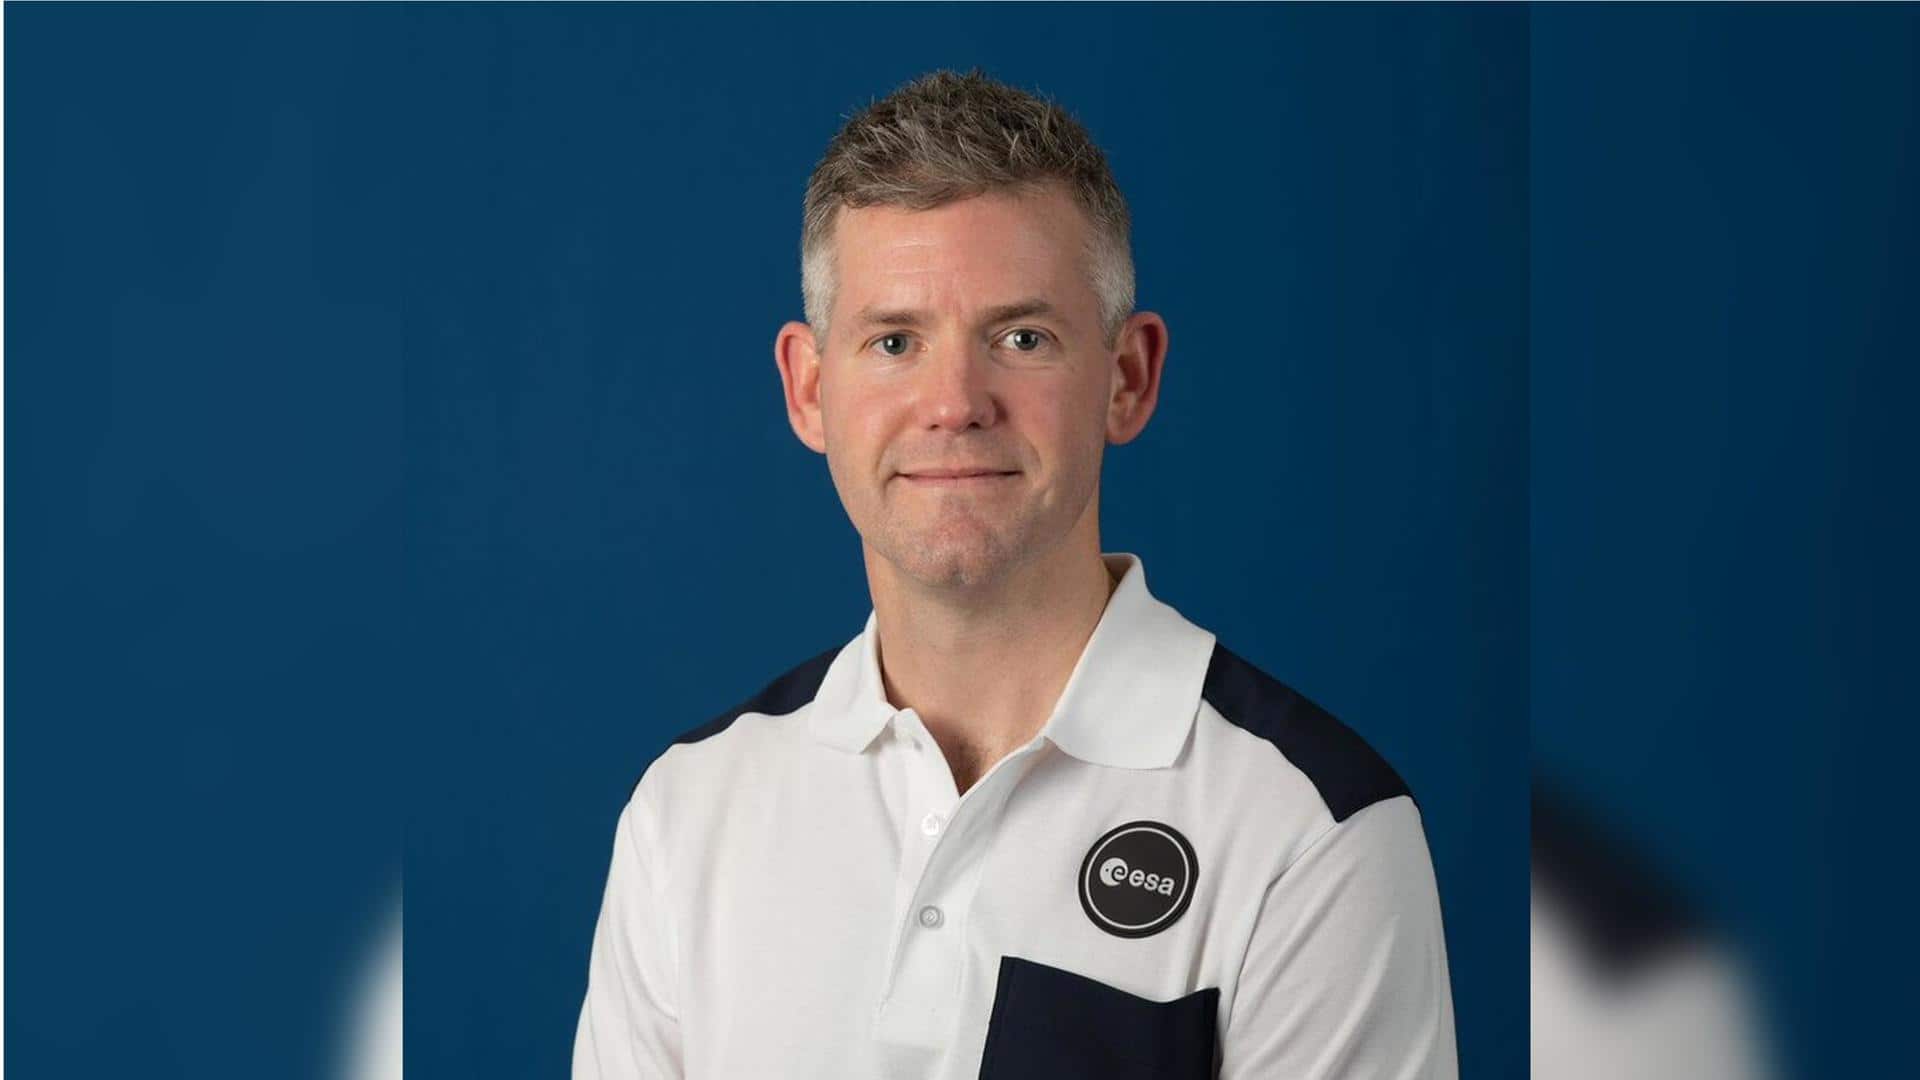 British Paralympian John McFall selected as ESA's first differently-abled astronaut